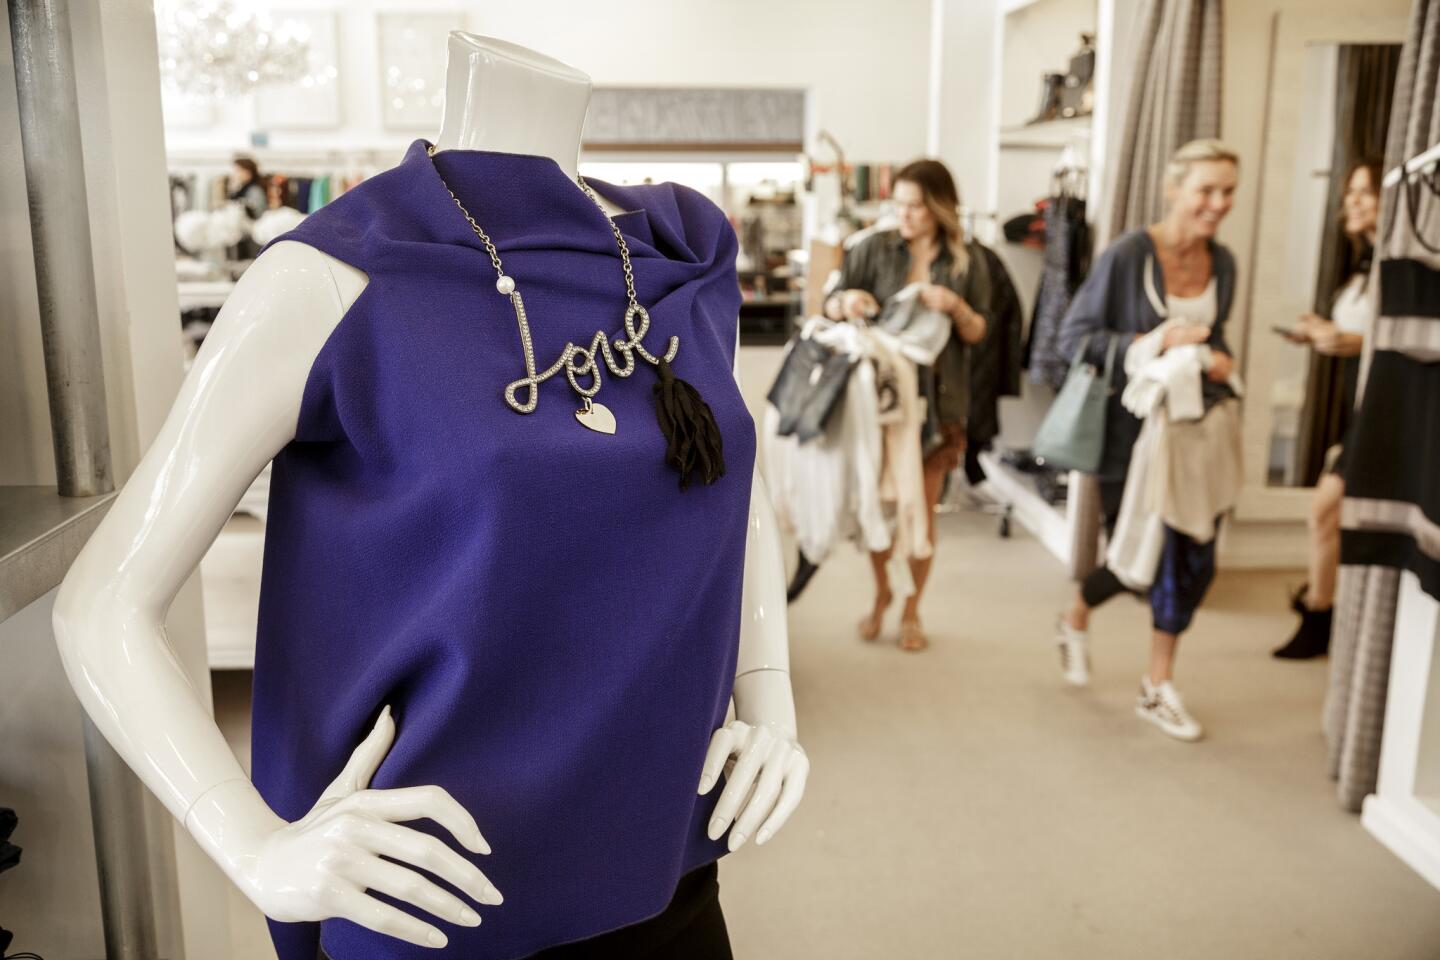 The Antioch Street boutique is famous for Walker's attentiveness to clients and the mix of casual and designer. Here, a Roland Mouret blouse is paired with a Lanvin Love necklace, while customers wander the store.